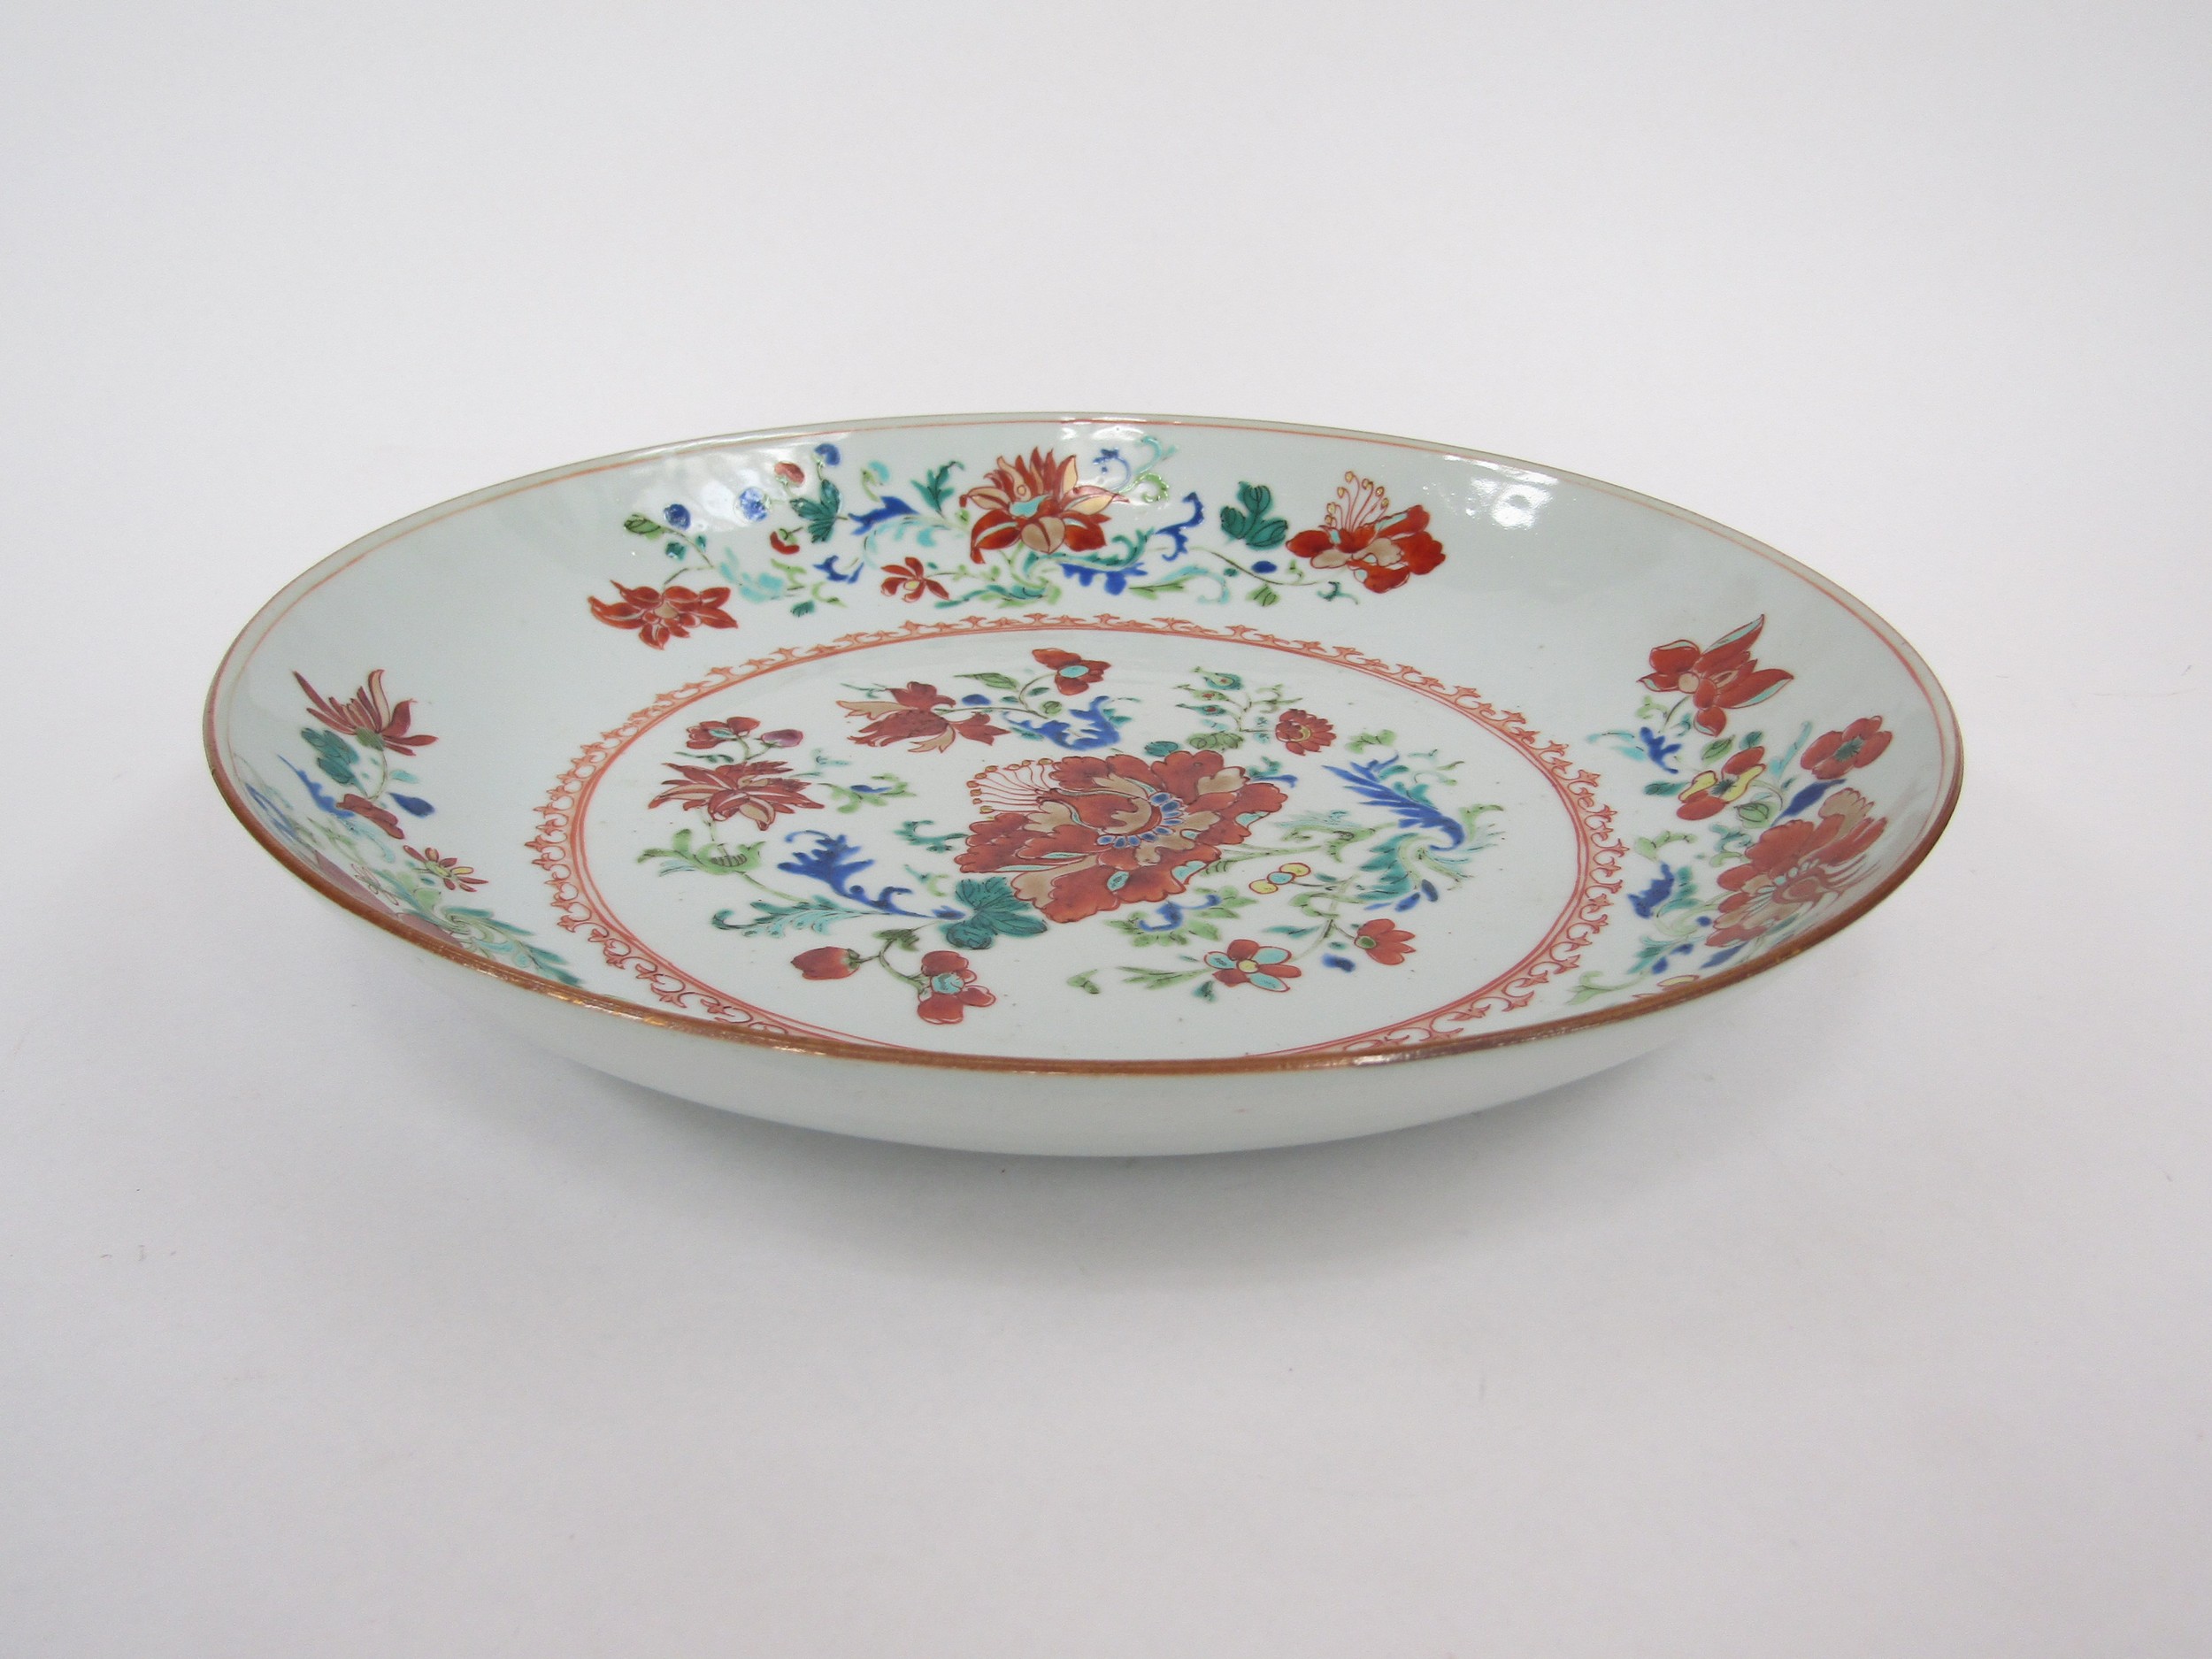 An 18th Century Famille Rose porcelain shallow bowl, red border and floral sprays enriched with - Image 2 of 3